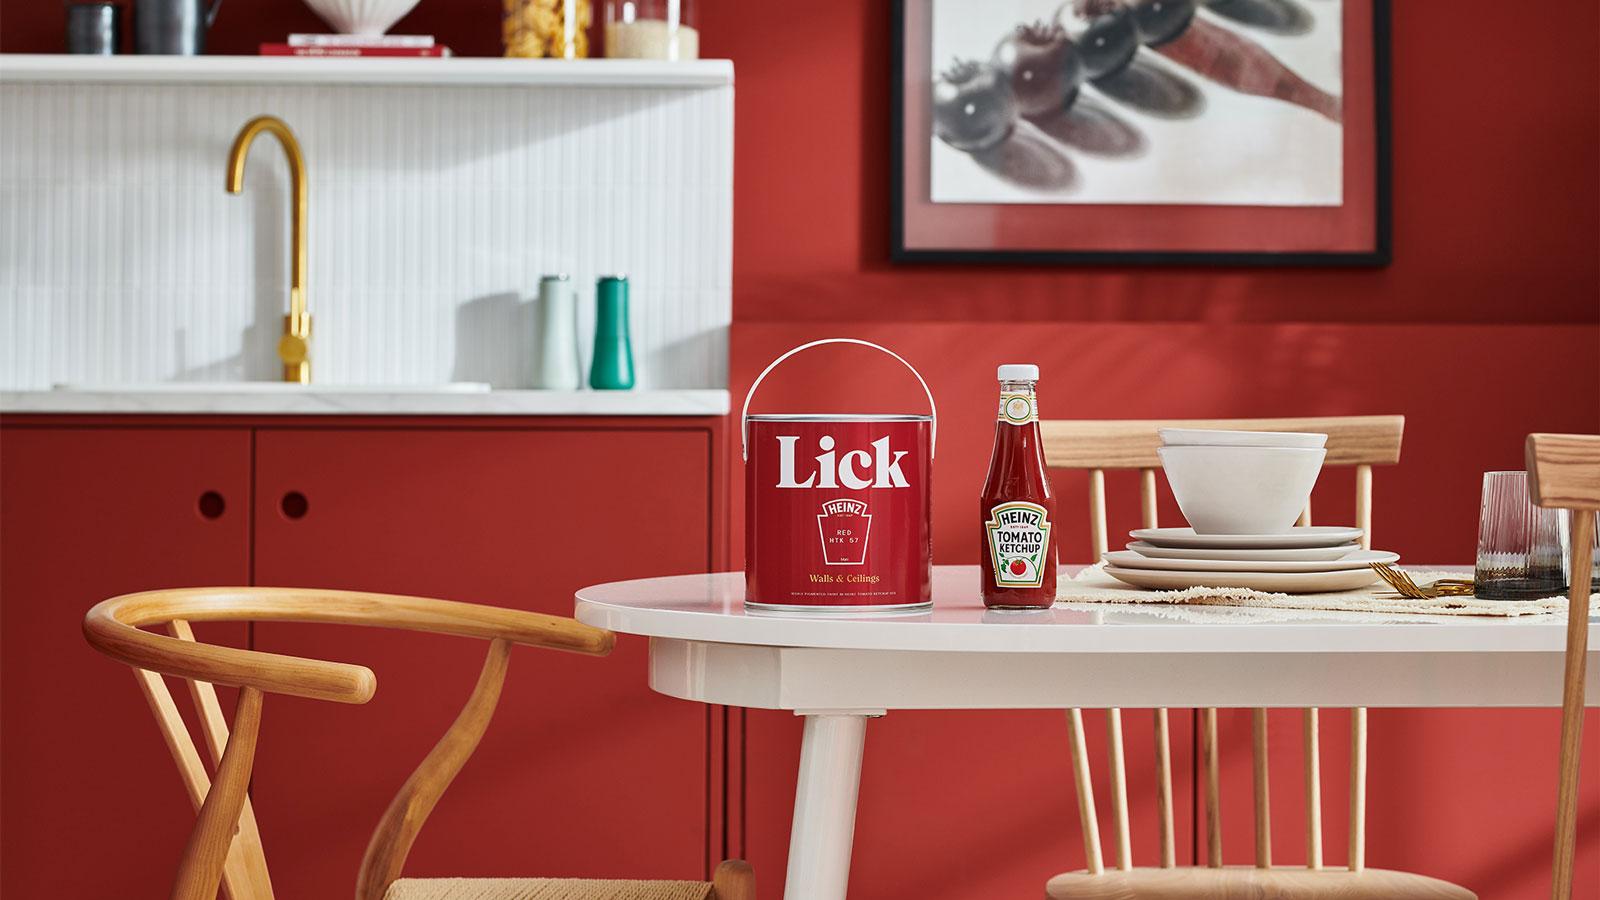 Lick paint launches Heinz Tomato Ketchup colour